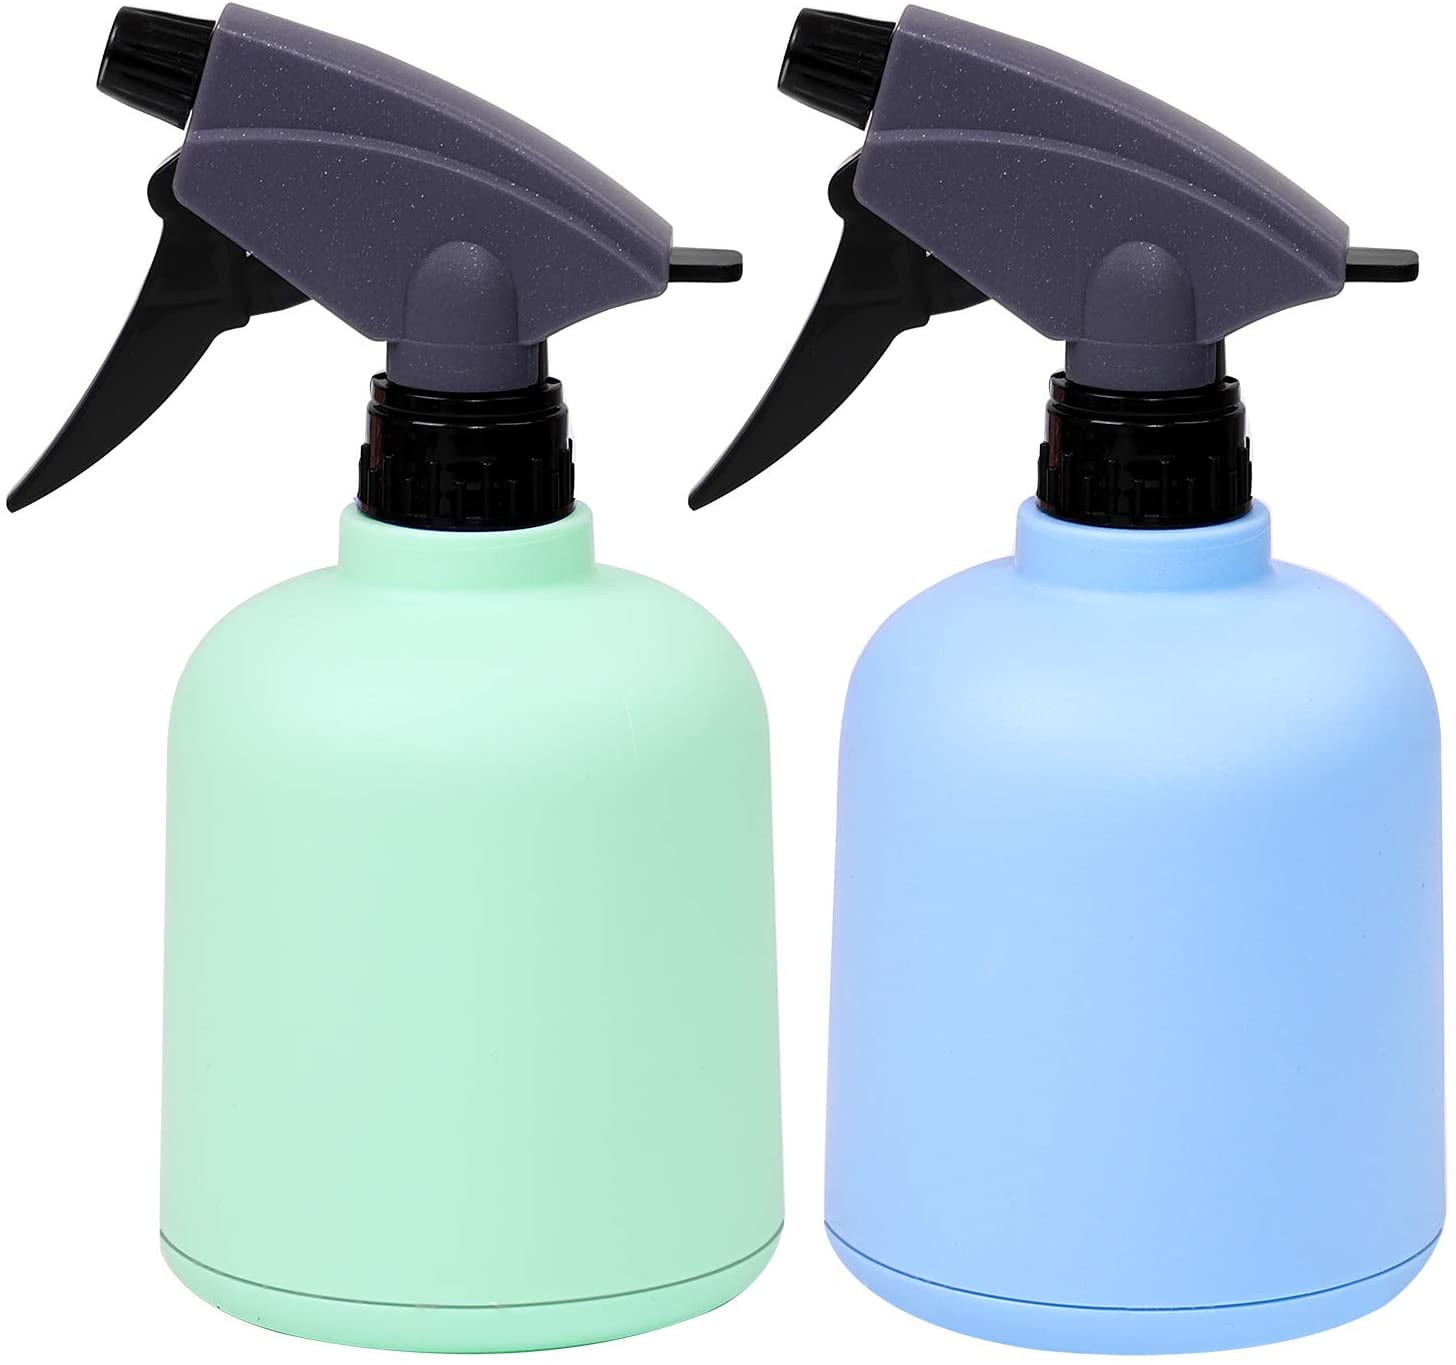 600ml Cleaning URATOT 2 Pieces Blue and Green Plastic Spray Bottle Empty Spray Bottle Colorful Bottles for Gardening